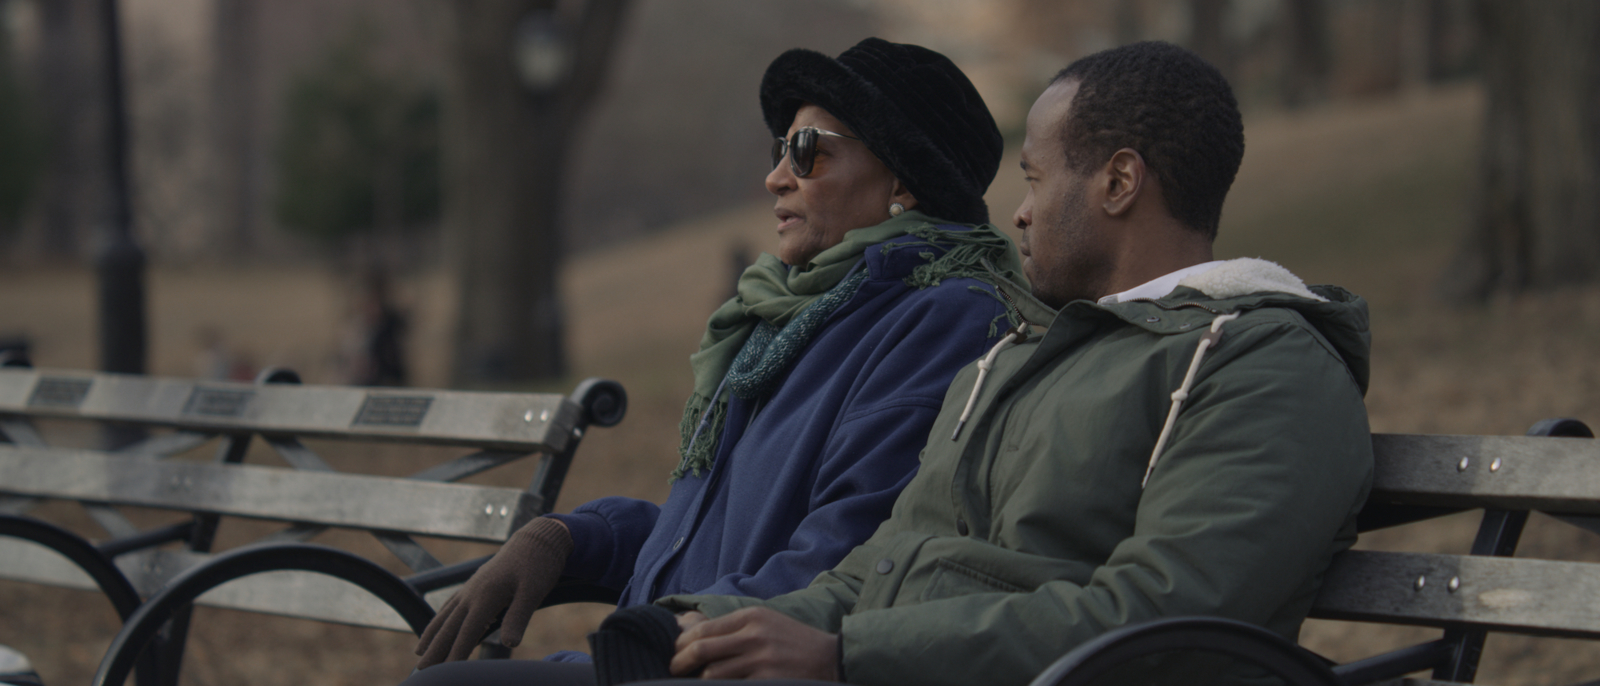 Character Development Side view of African American man and woman sitting on a bench talking